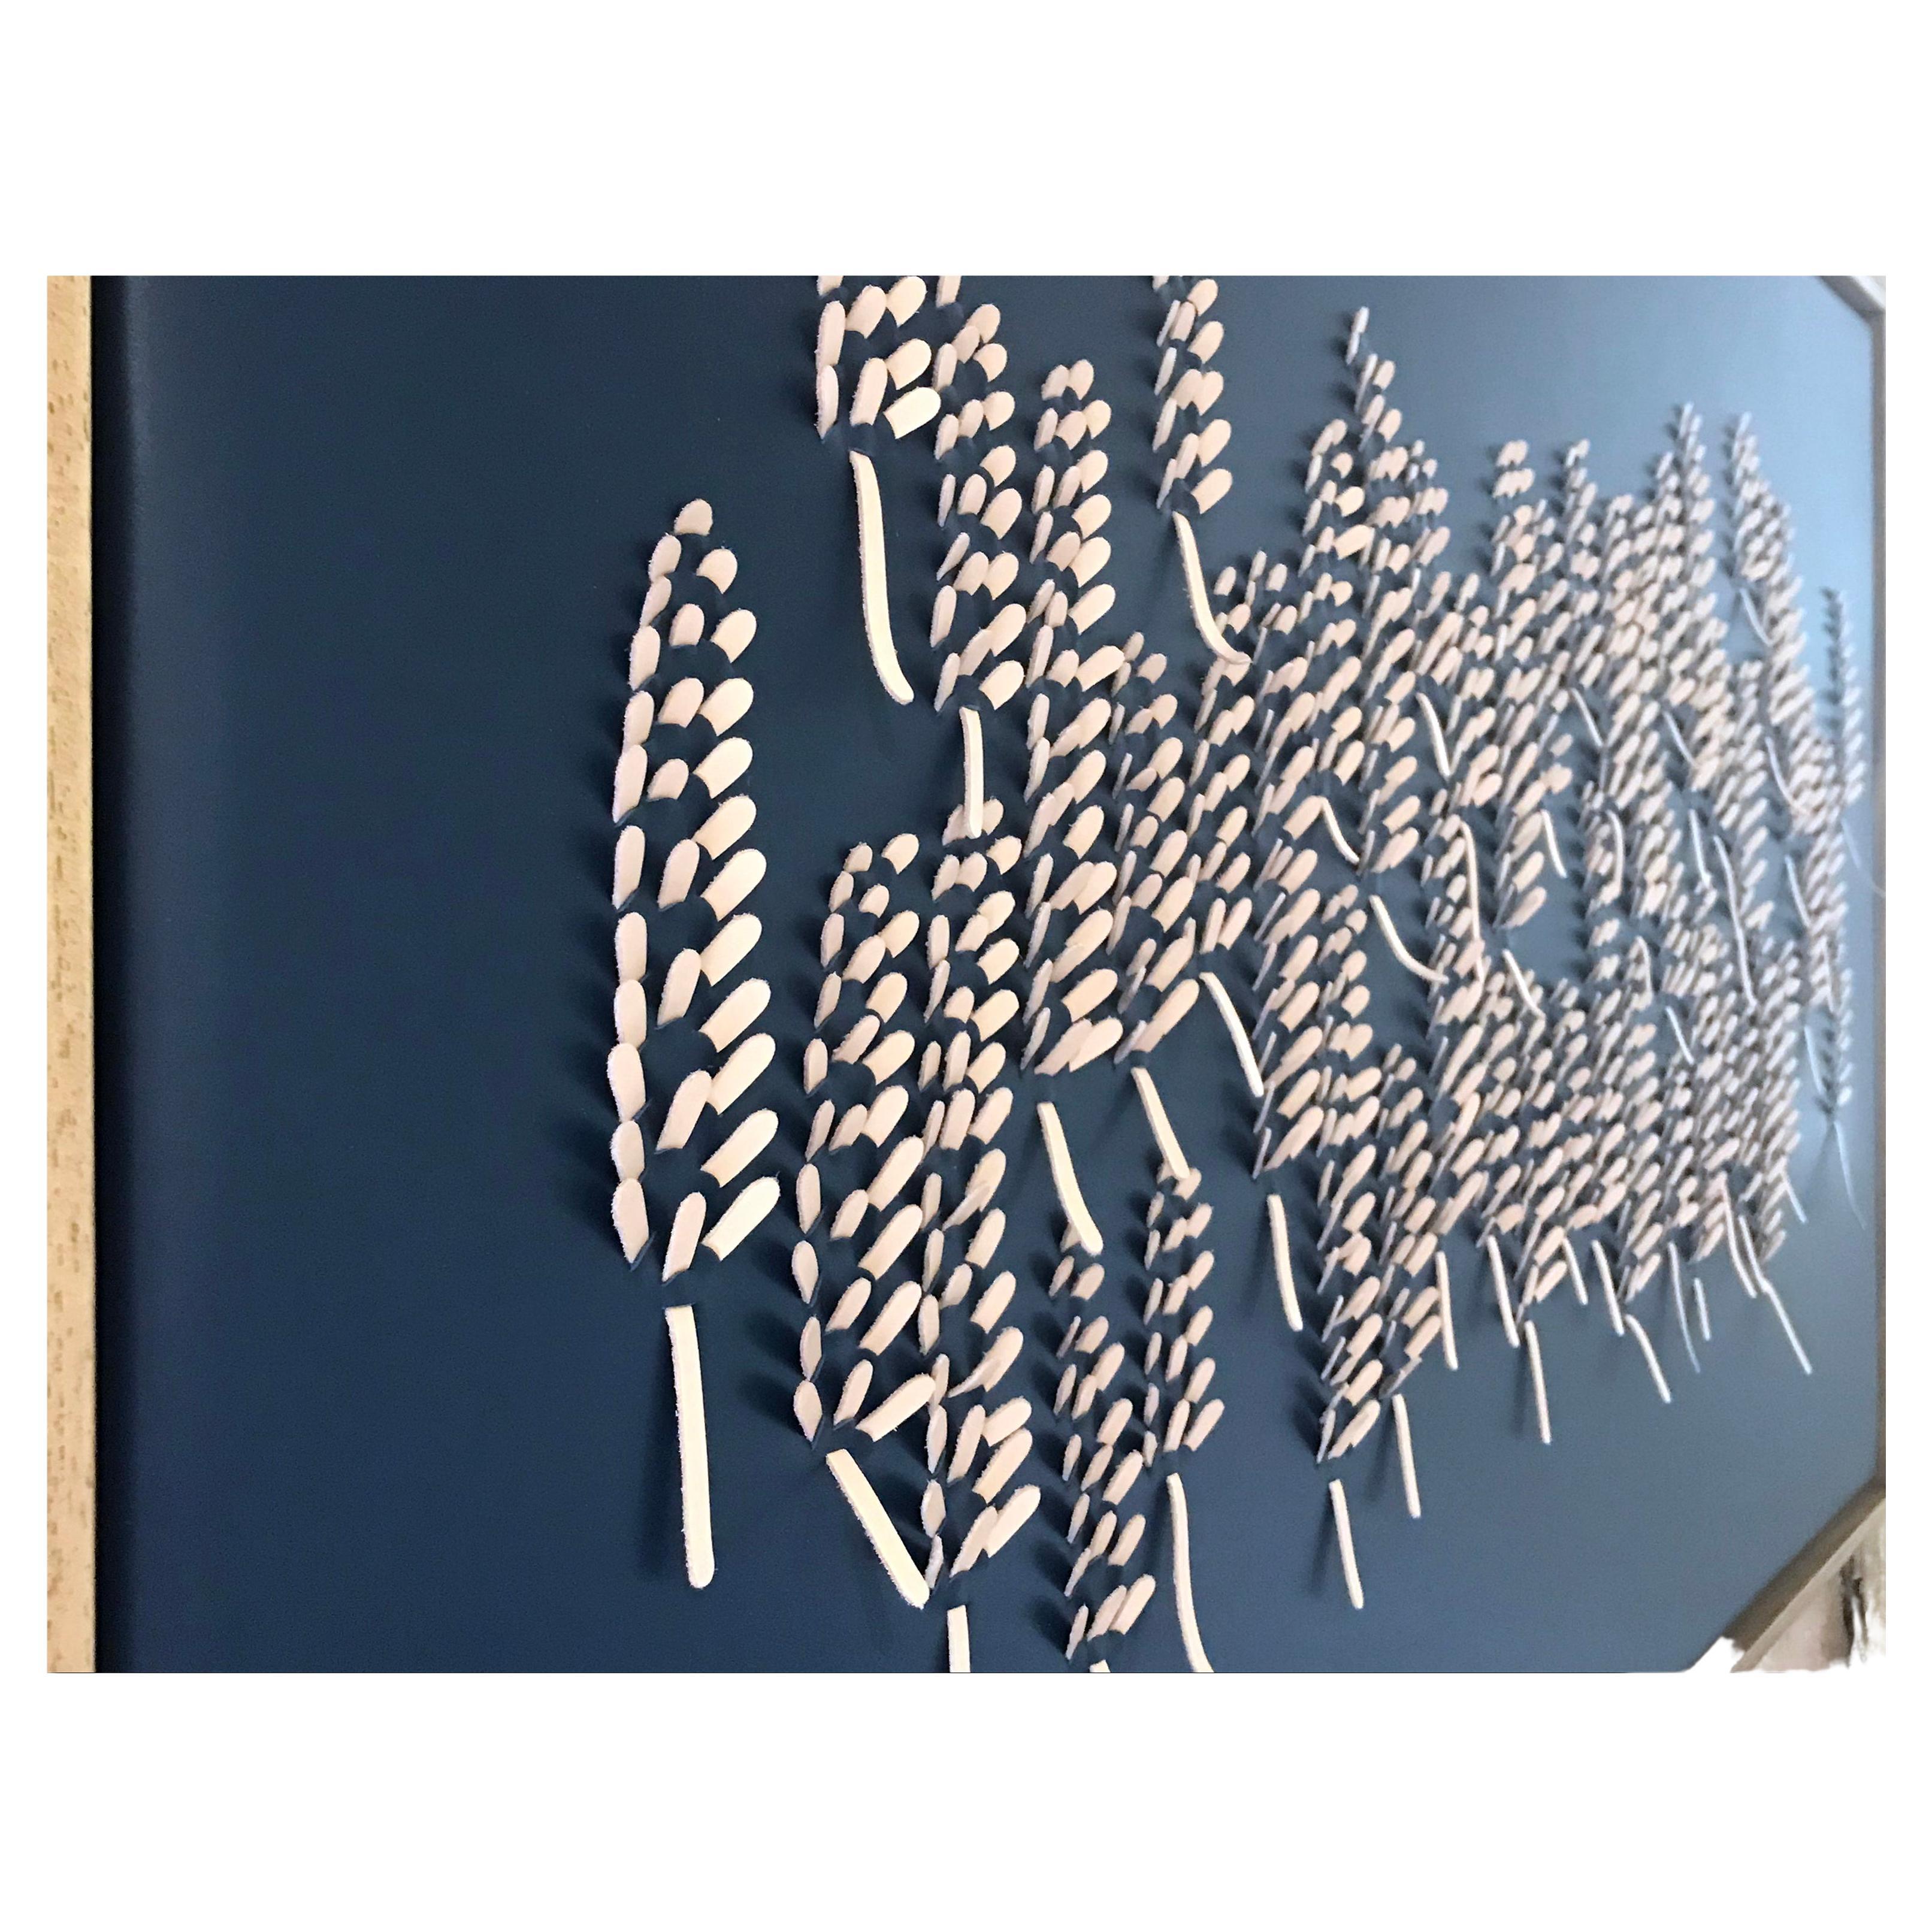 Lavender:

A piece of 3D sculptural wall art designed and made from two layers of leather, one blue one pink, woven together by Louise Heighes.
Measurements are 31 x 49 inches or 79 x 124 cm

This piece of wall art is inspired by the tiny